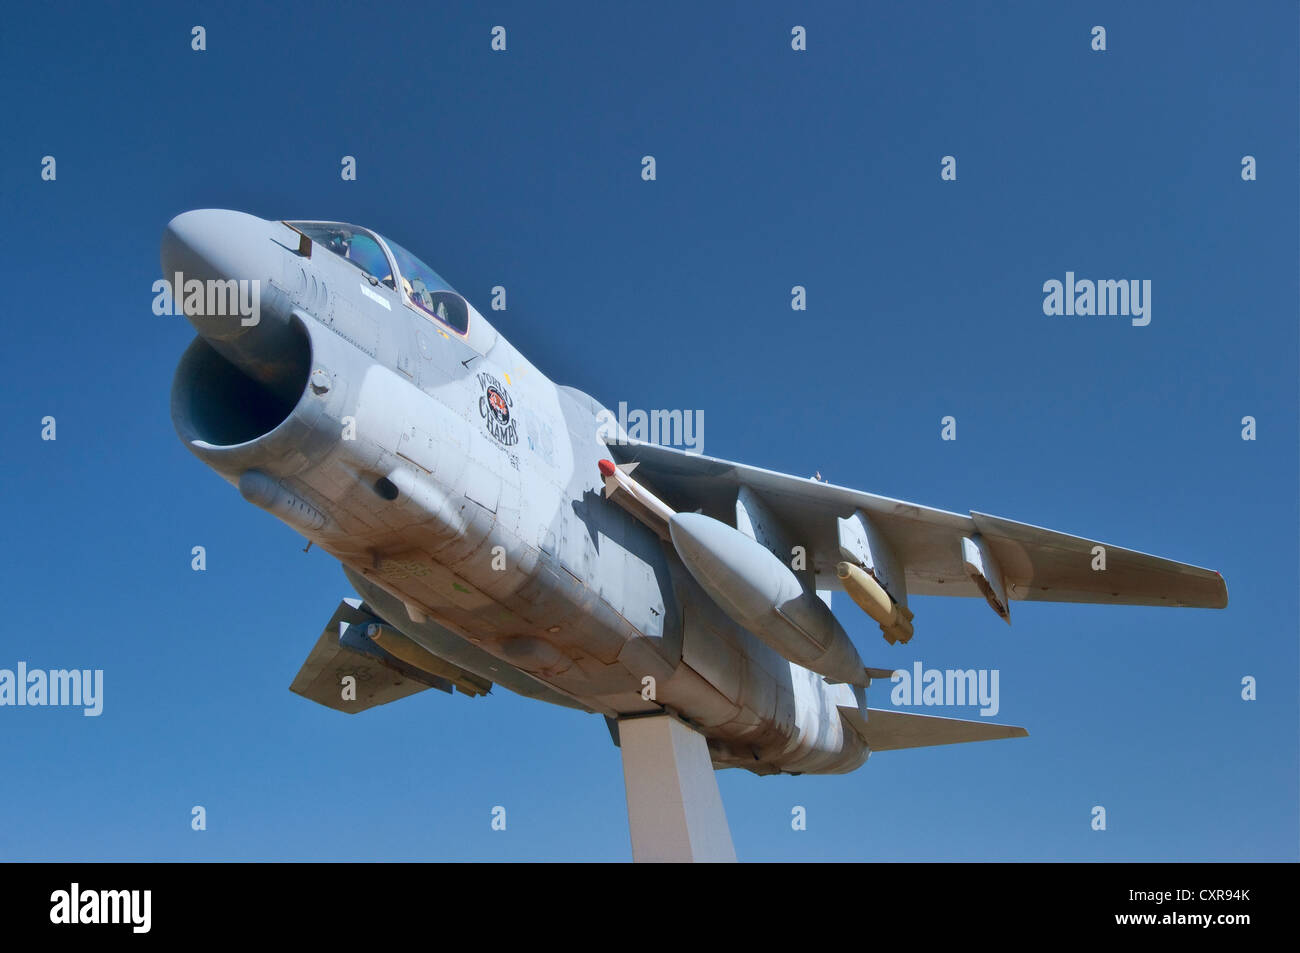 A-7D Corsair II light attack aircraft on display at Regional Airport in Montrose, Colorado Stock Photo